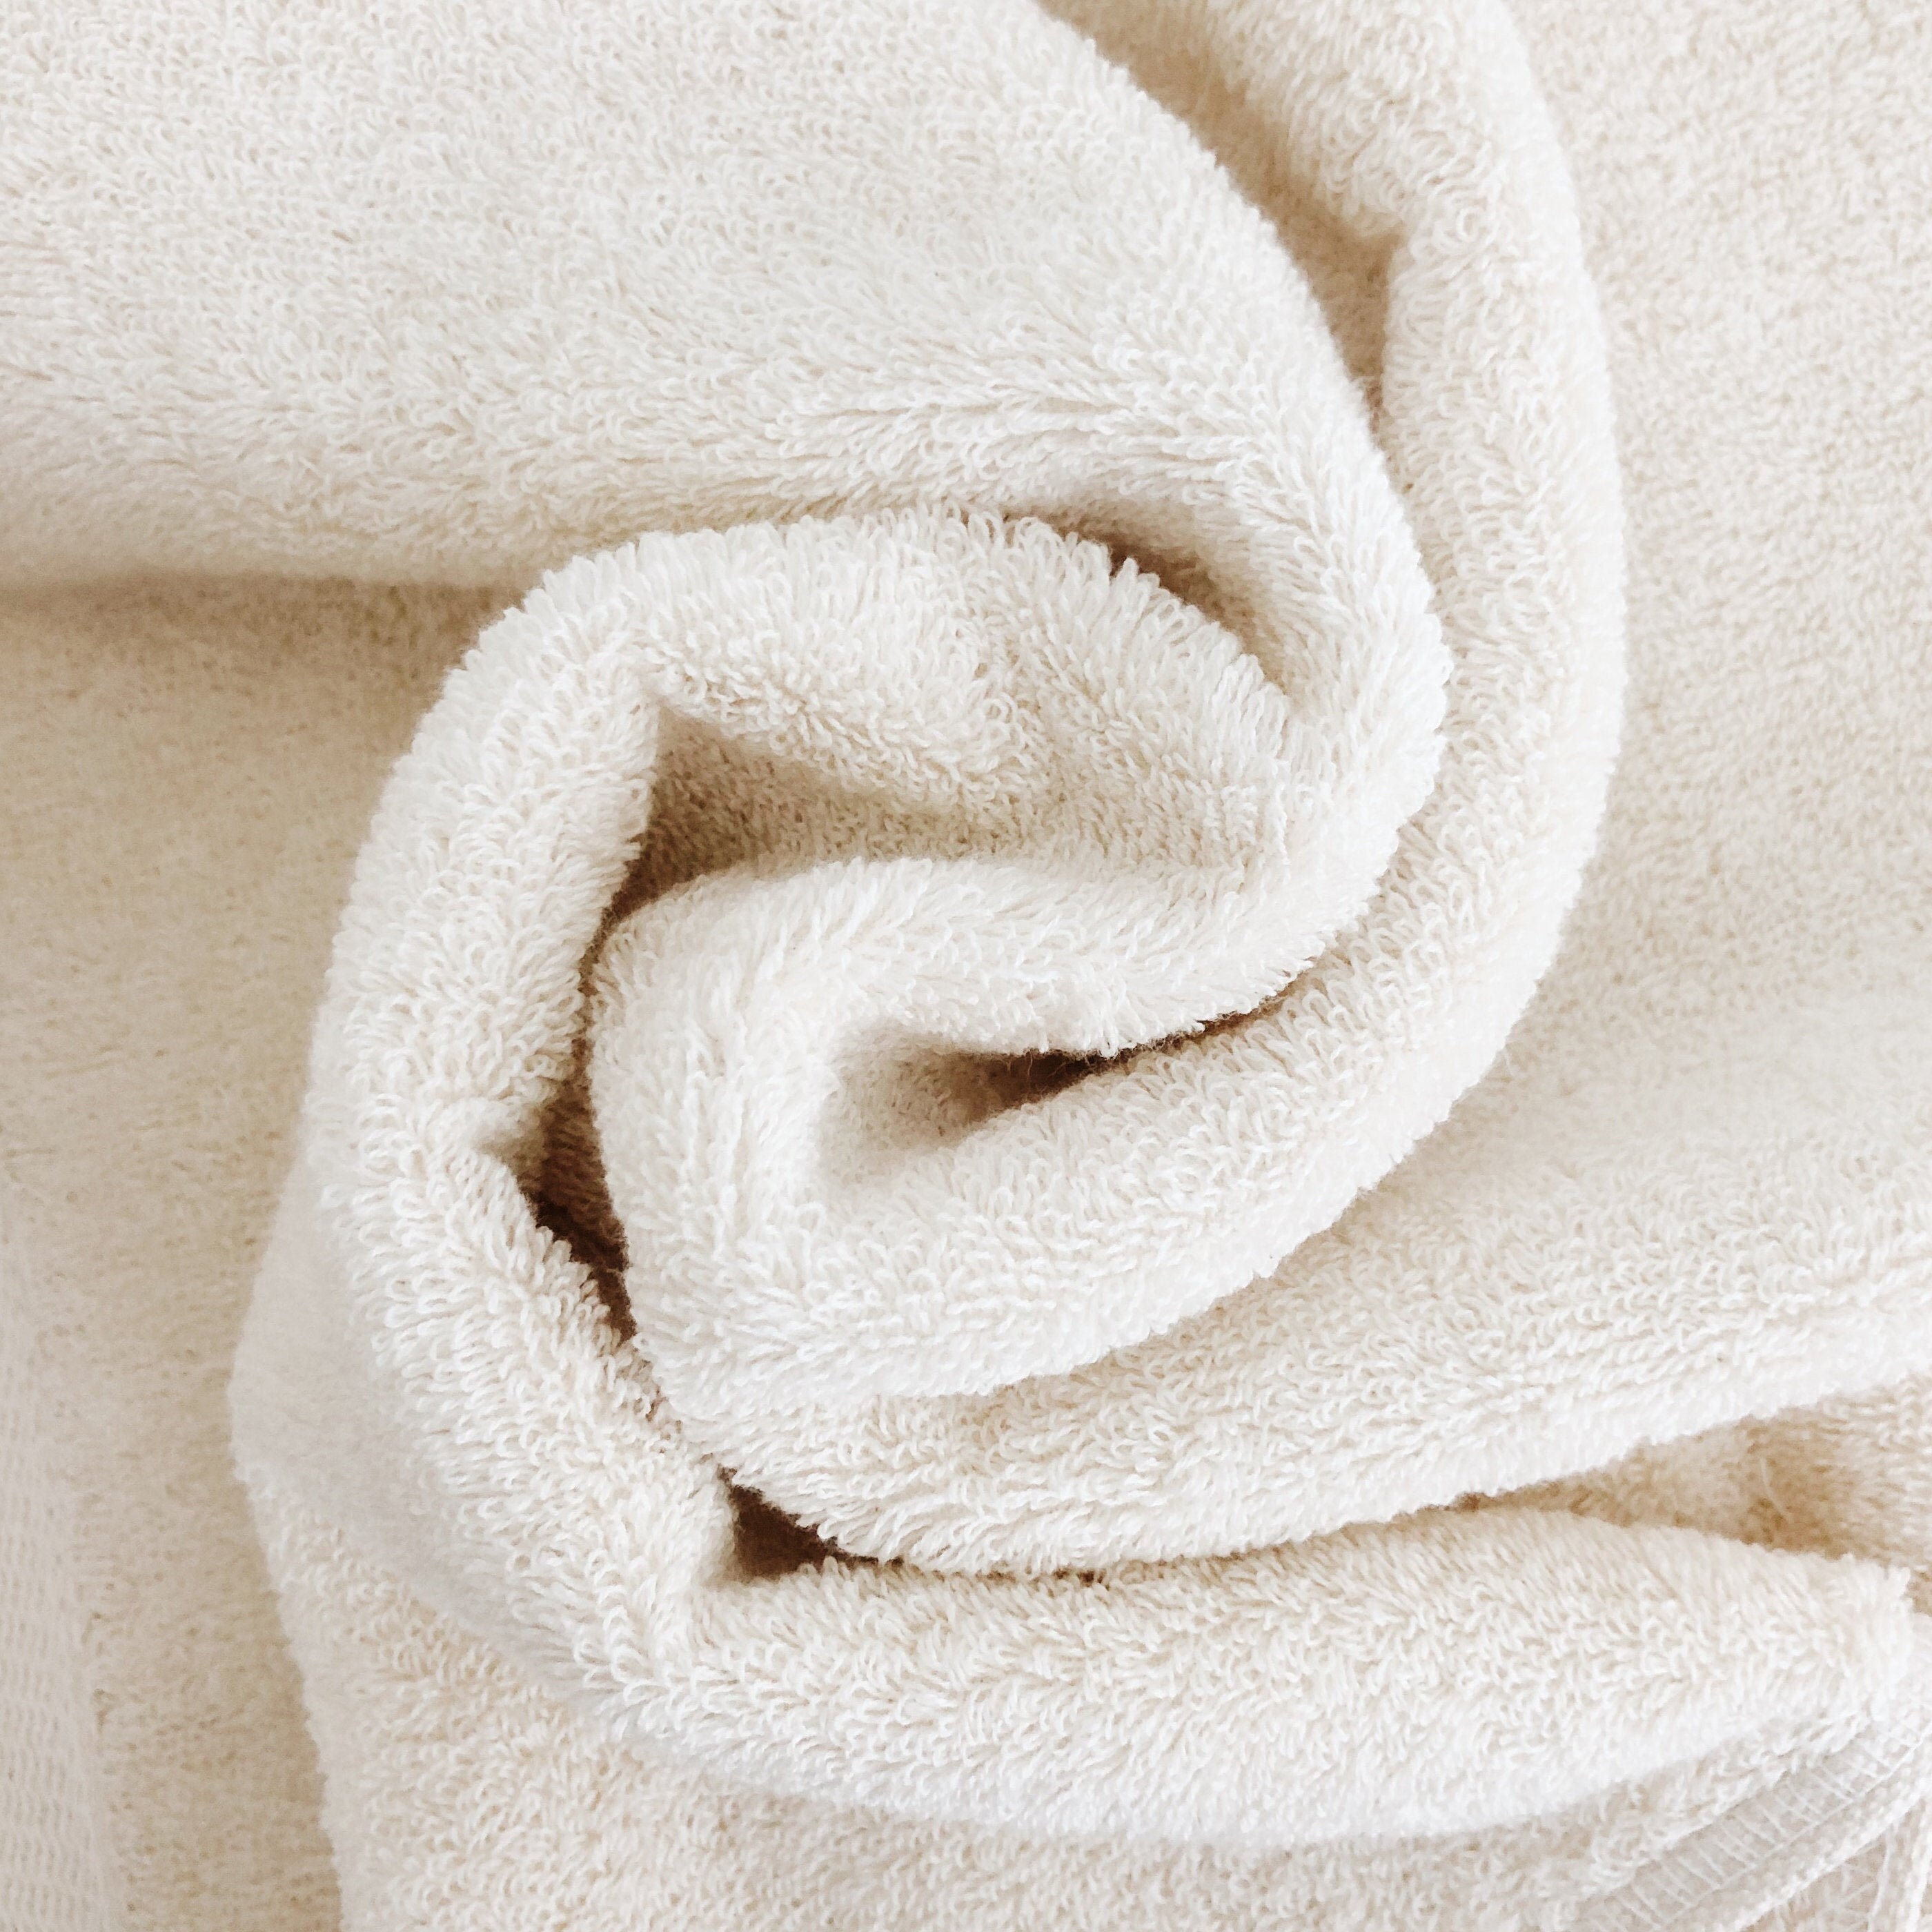 Organic Cotton Bath Towel 1pc, Organic Bathroom Towels Set, Soft and Fluffy  Towels, Hotel Spa Towels, Baby Wedding Holiday Gifts 